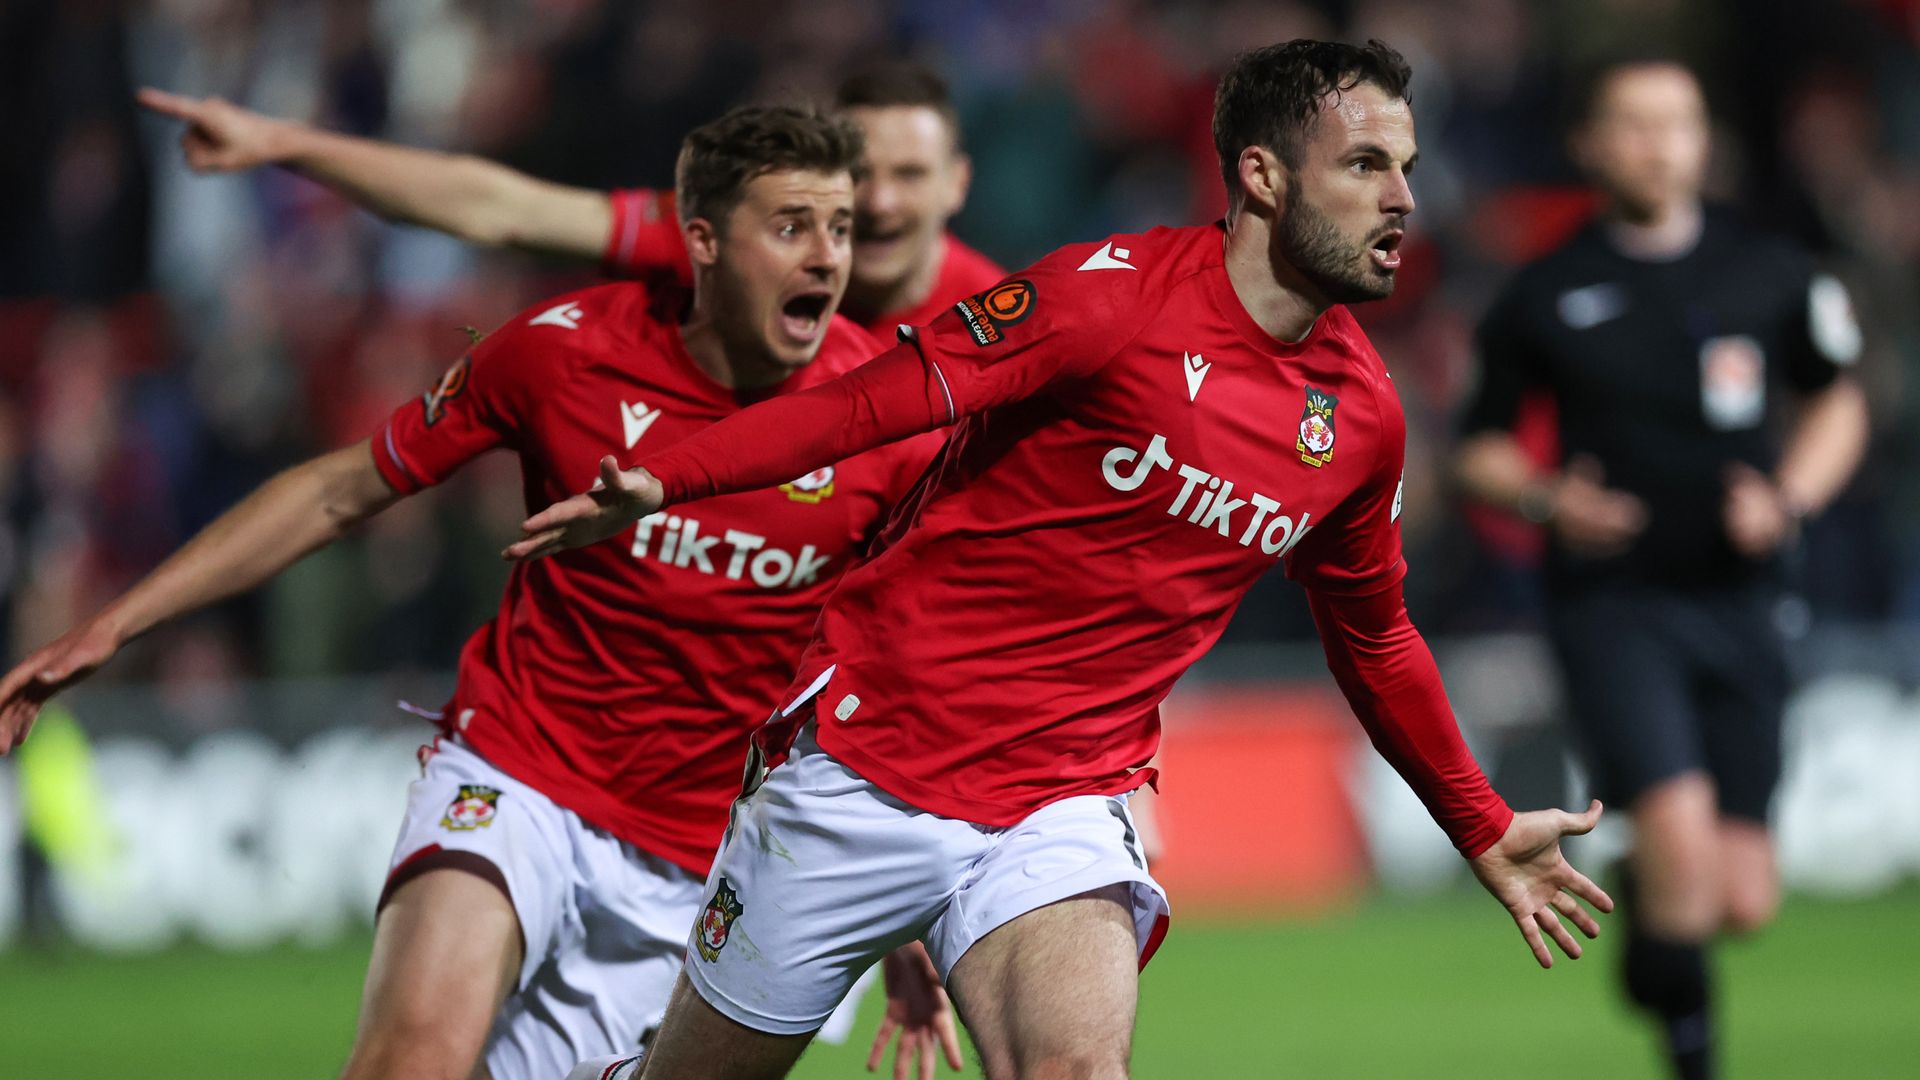 Carabao Cup: Wrexham to face Wigan in first round | Leicester travel to Burton